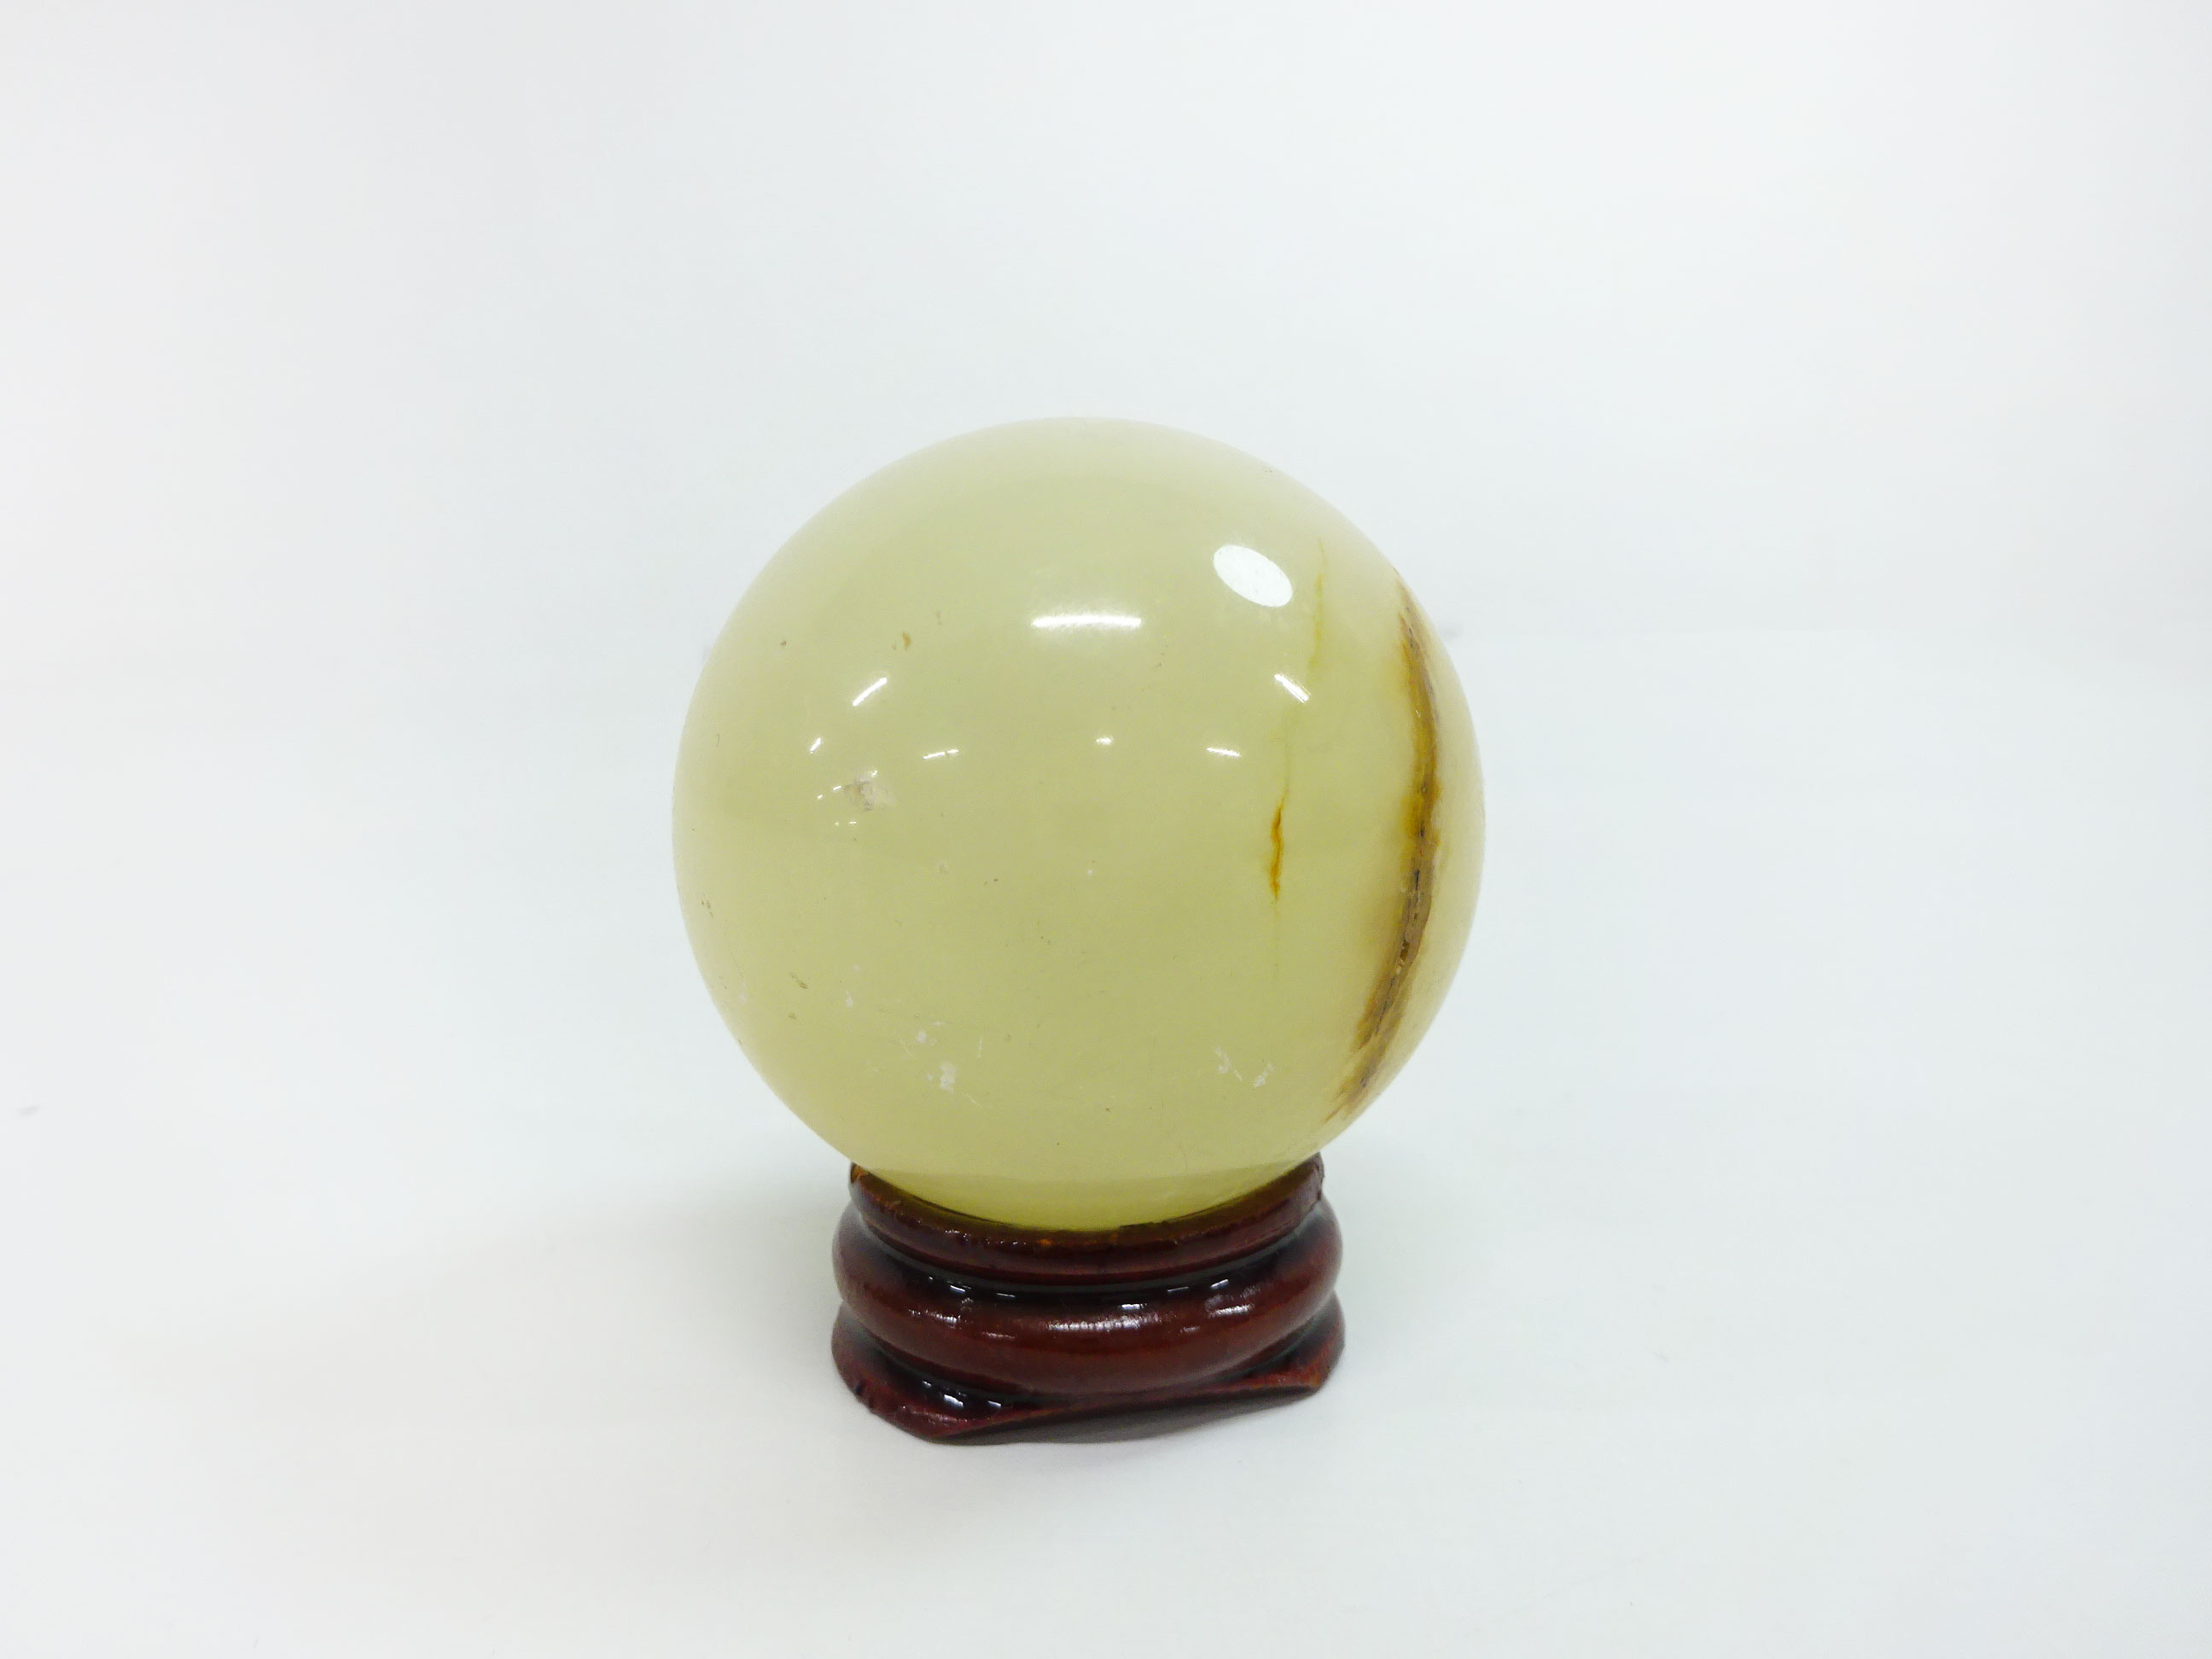 JAPANESE ORNAMENT / NATURAL CRYSTAL & MINERAL (191.86g) / HEALING CRYSTAL SPHERE